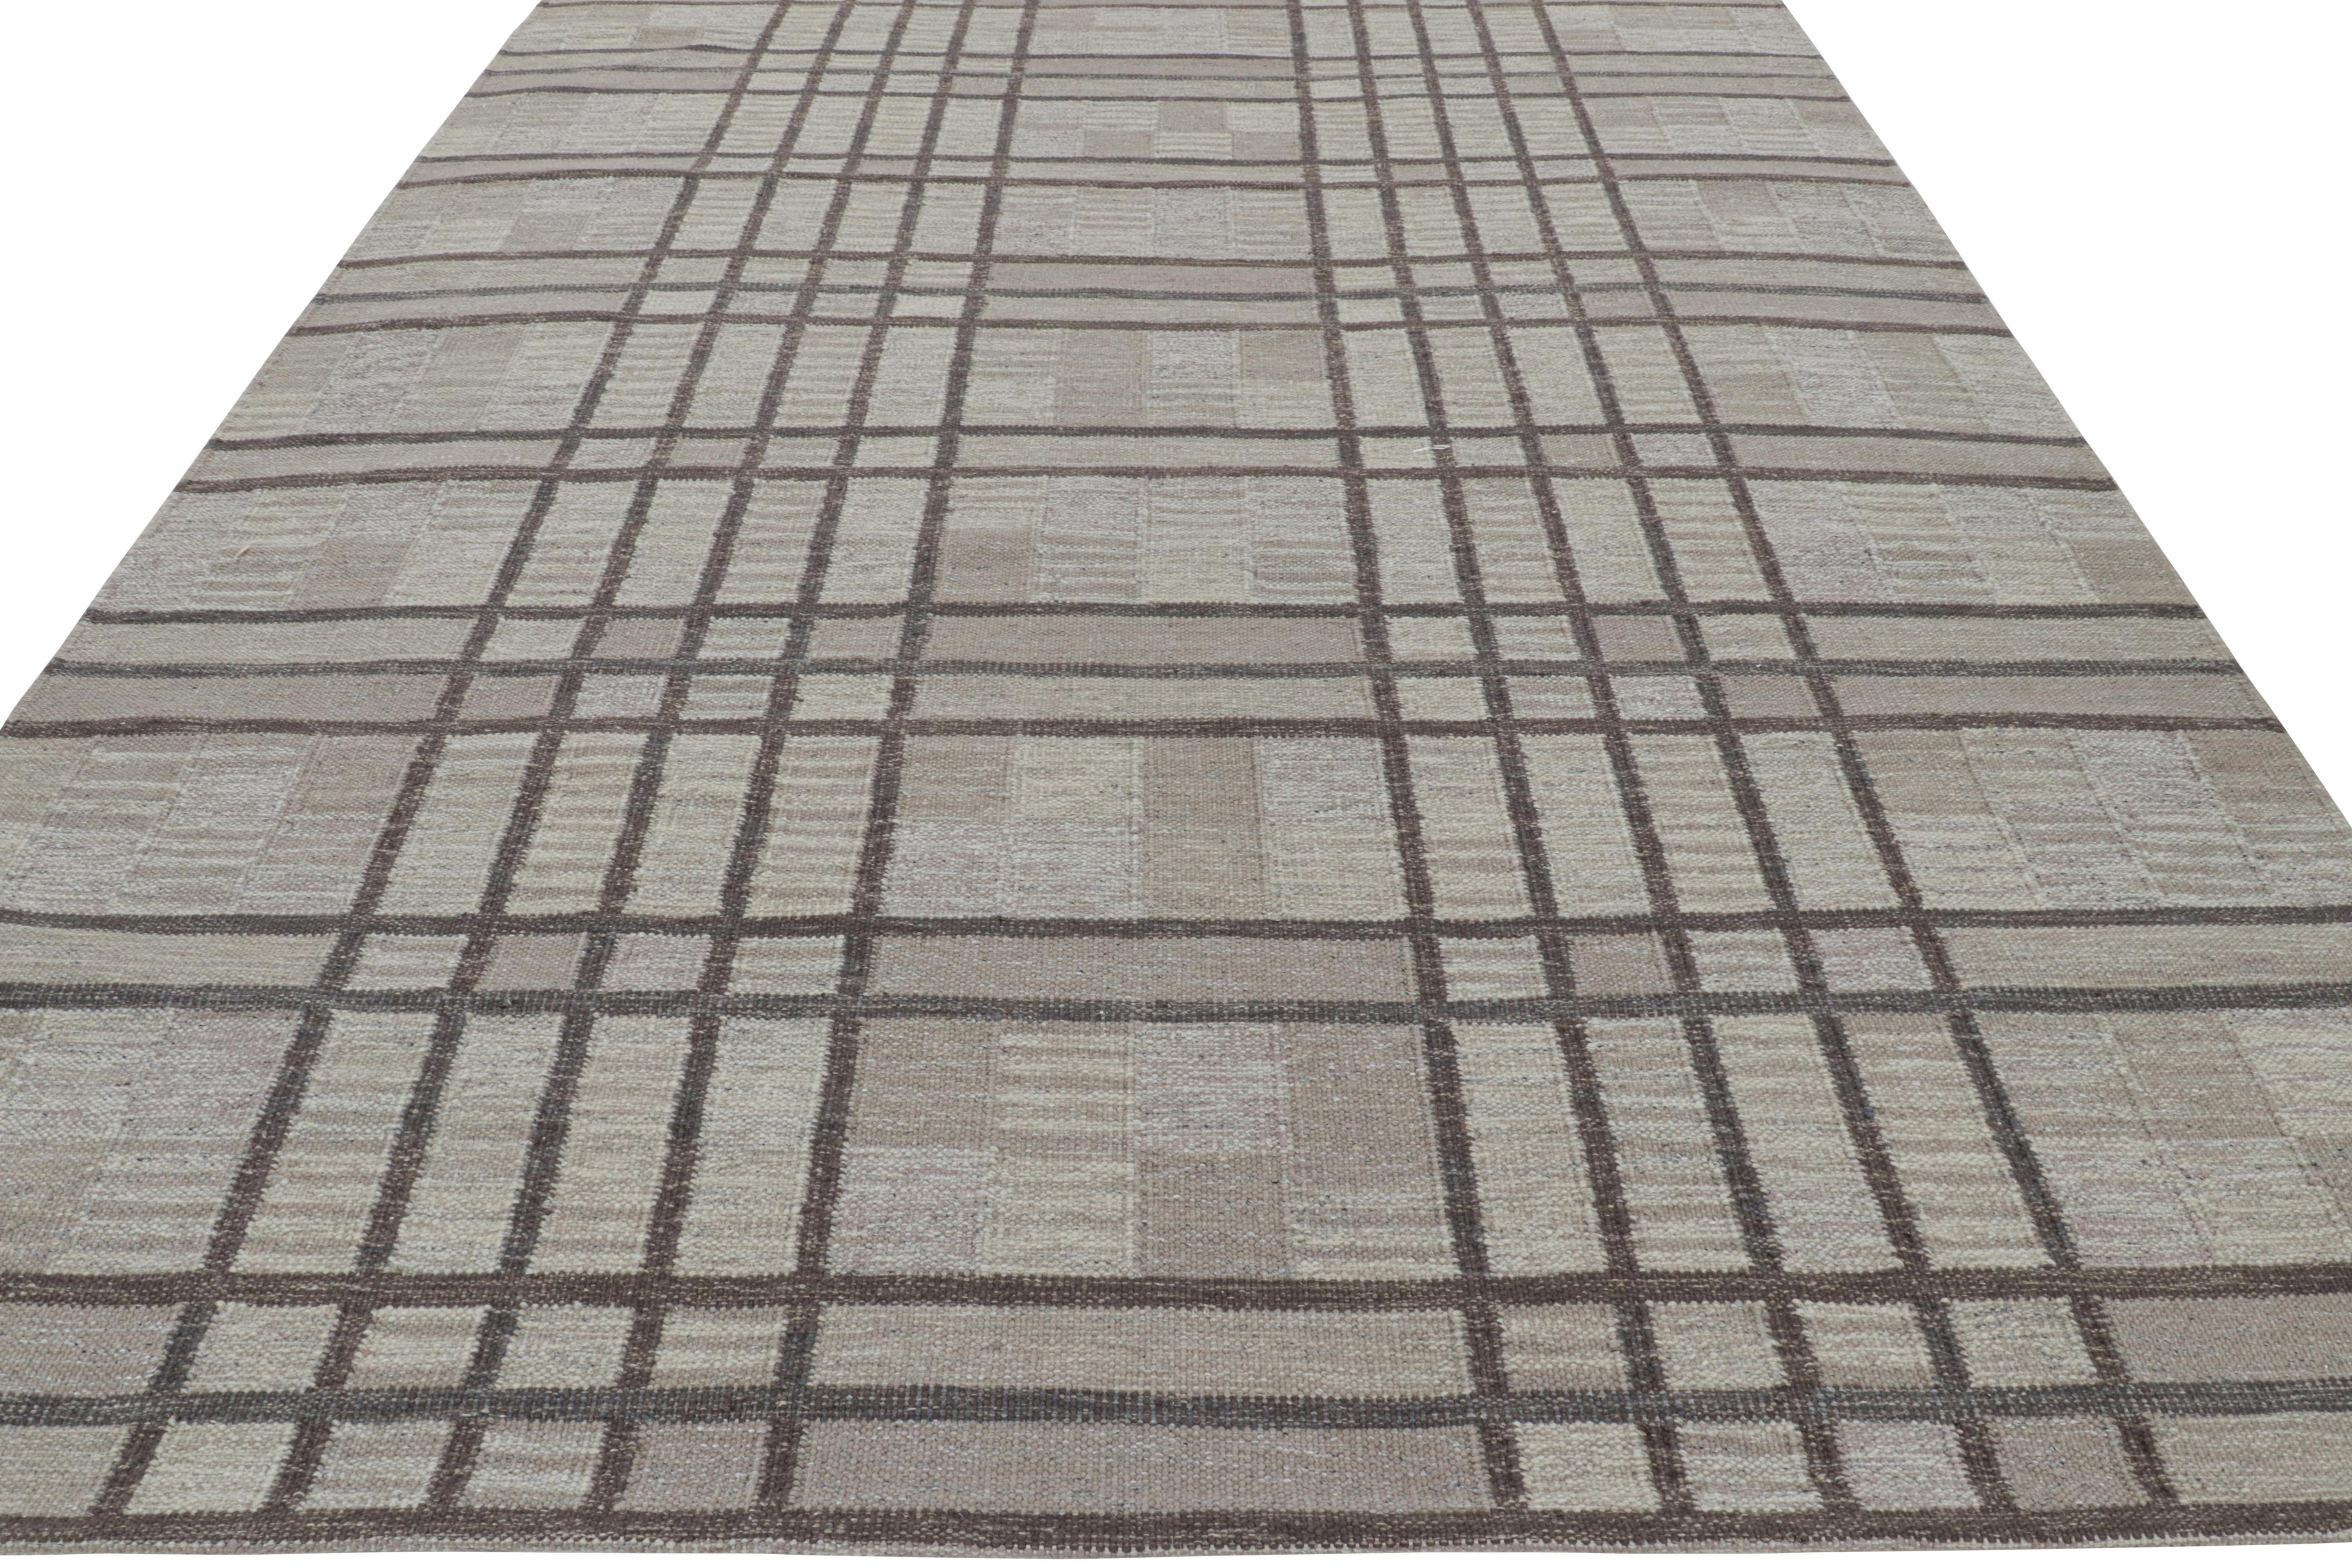 Hand-Woven Rug & Kilim’s Scandinavian Style Rug with Geometric Patterns in Tones of Brown For Sale